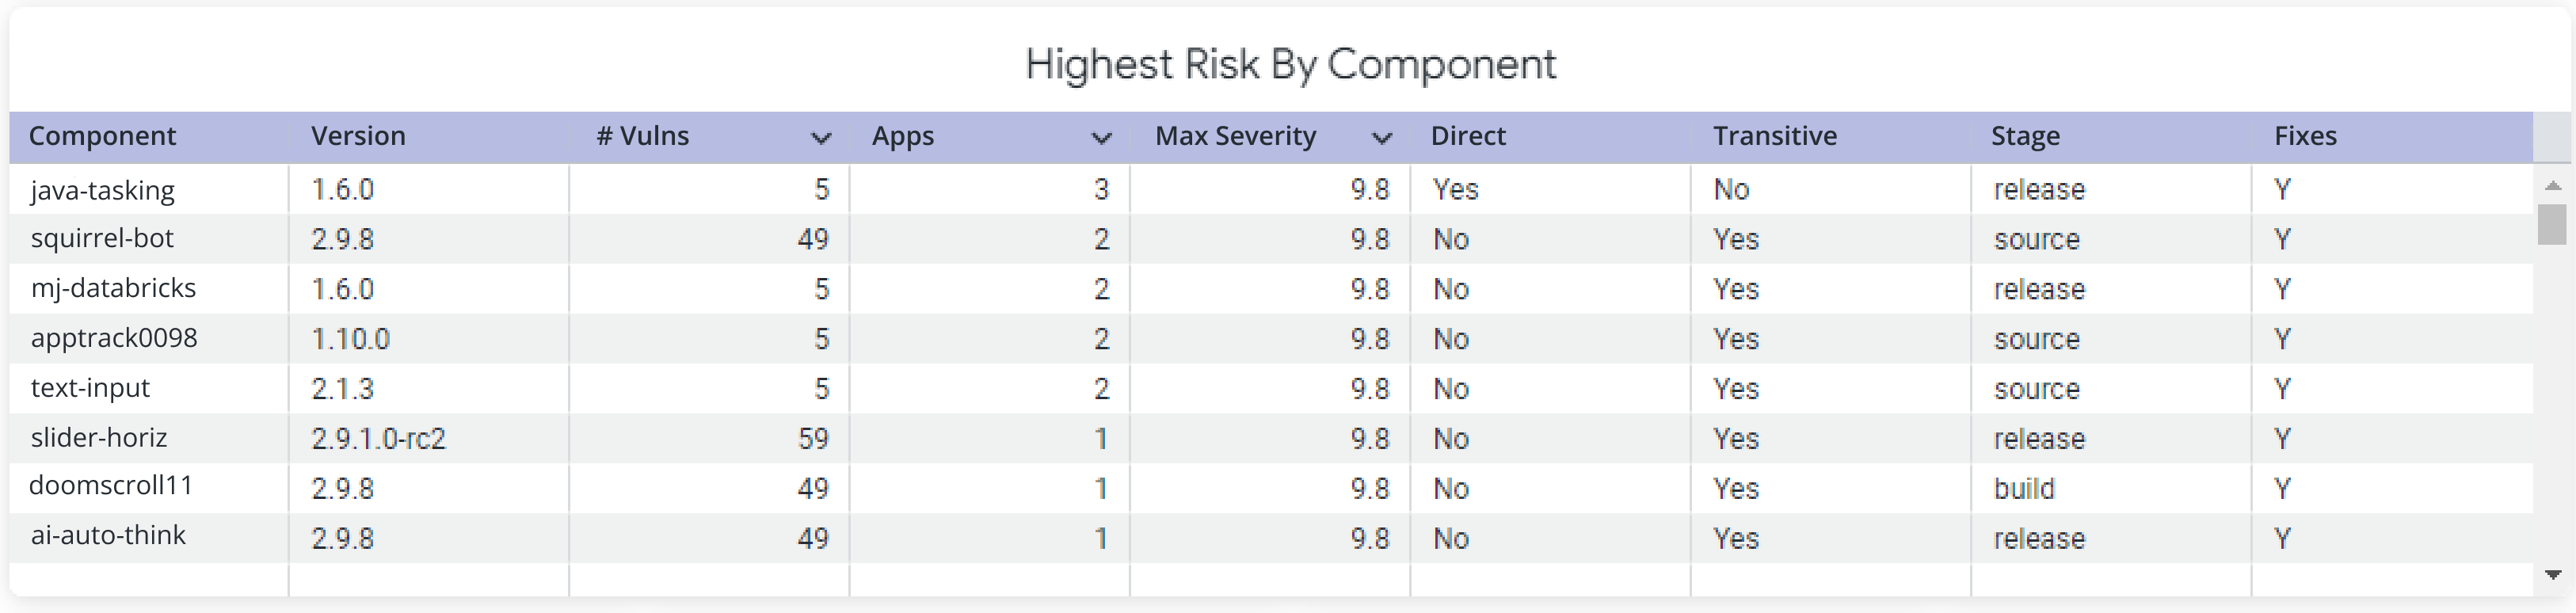 Highest_risk_by_component.png